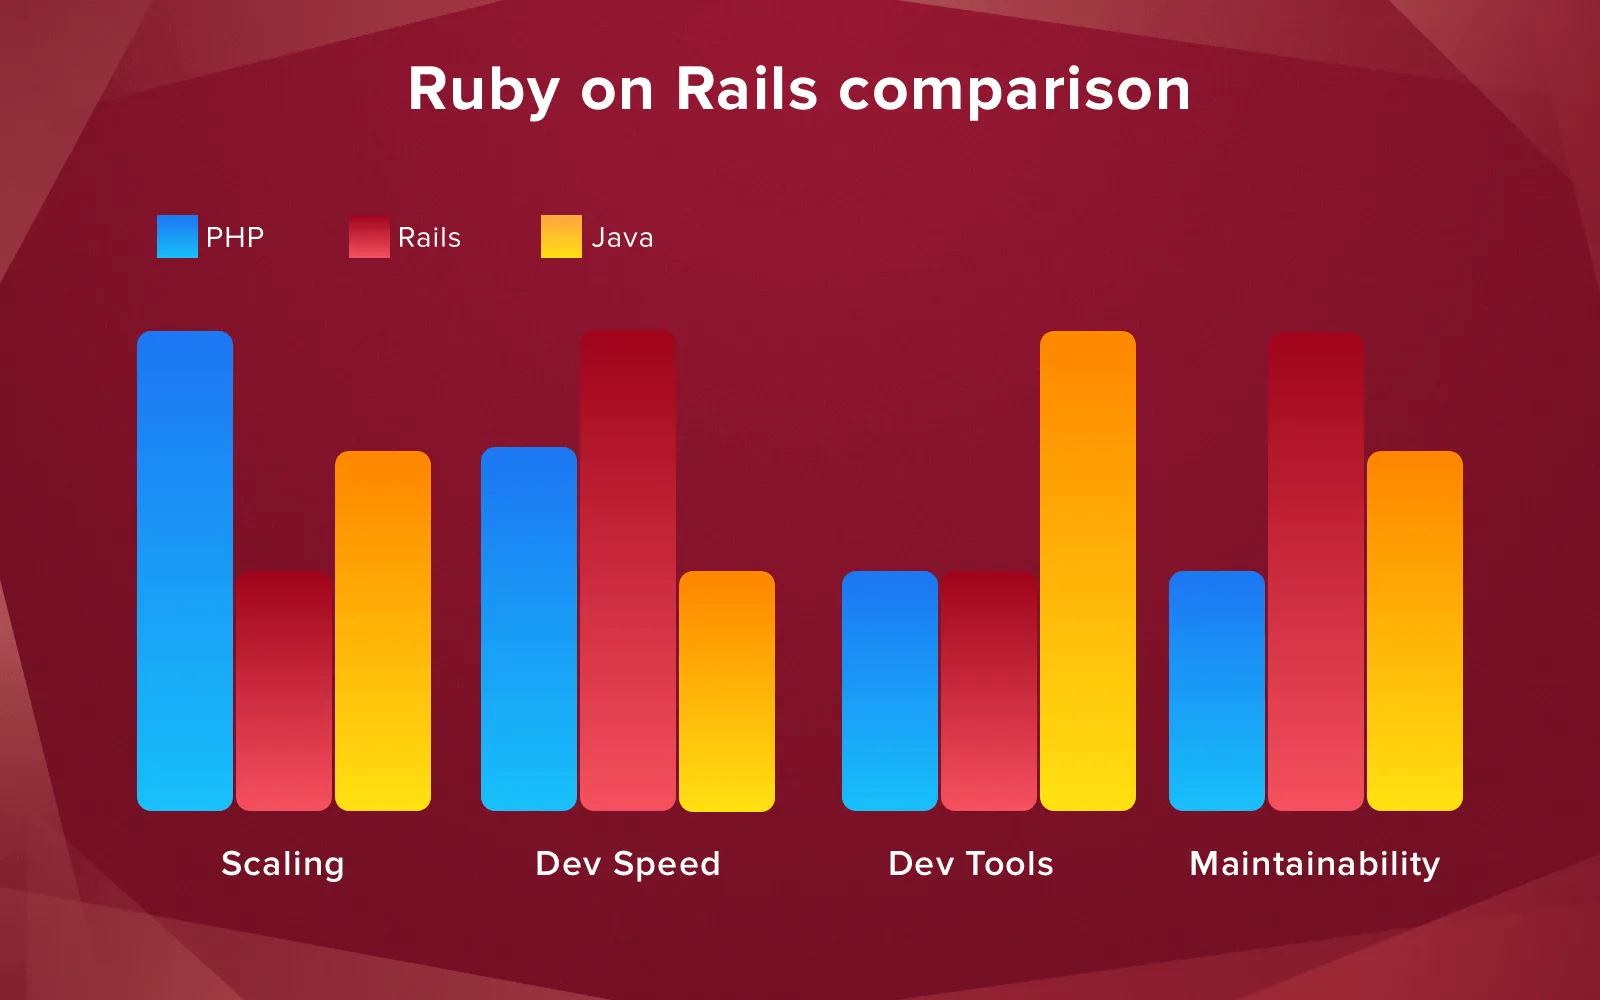 Advantages of Ruby on Rails over other languages